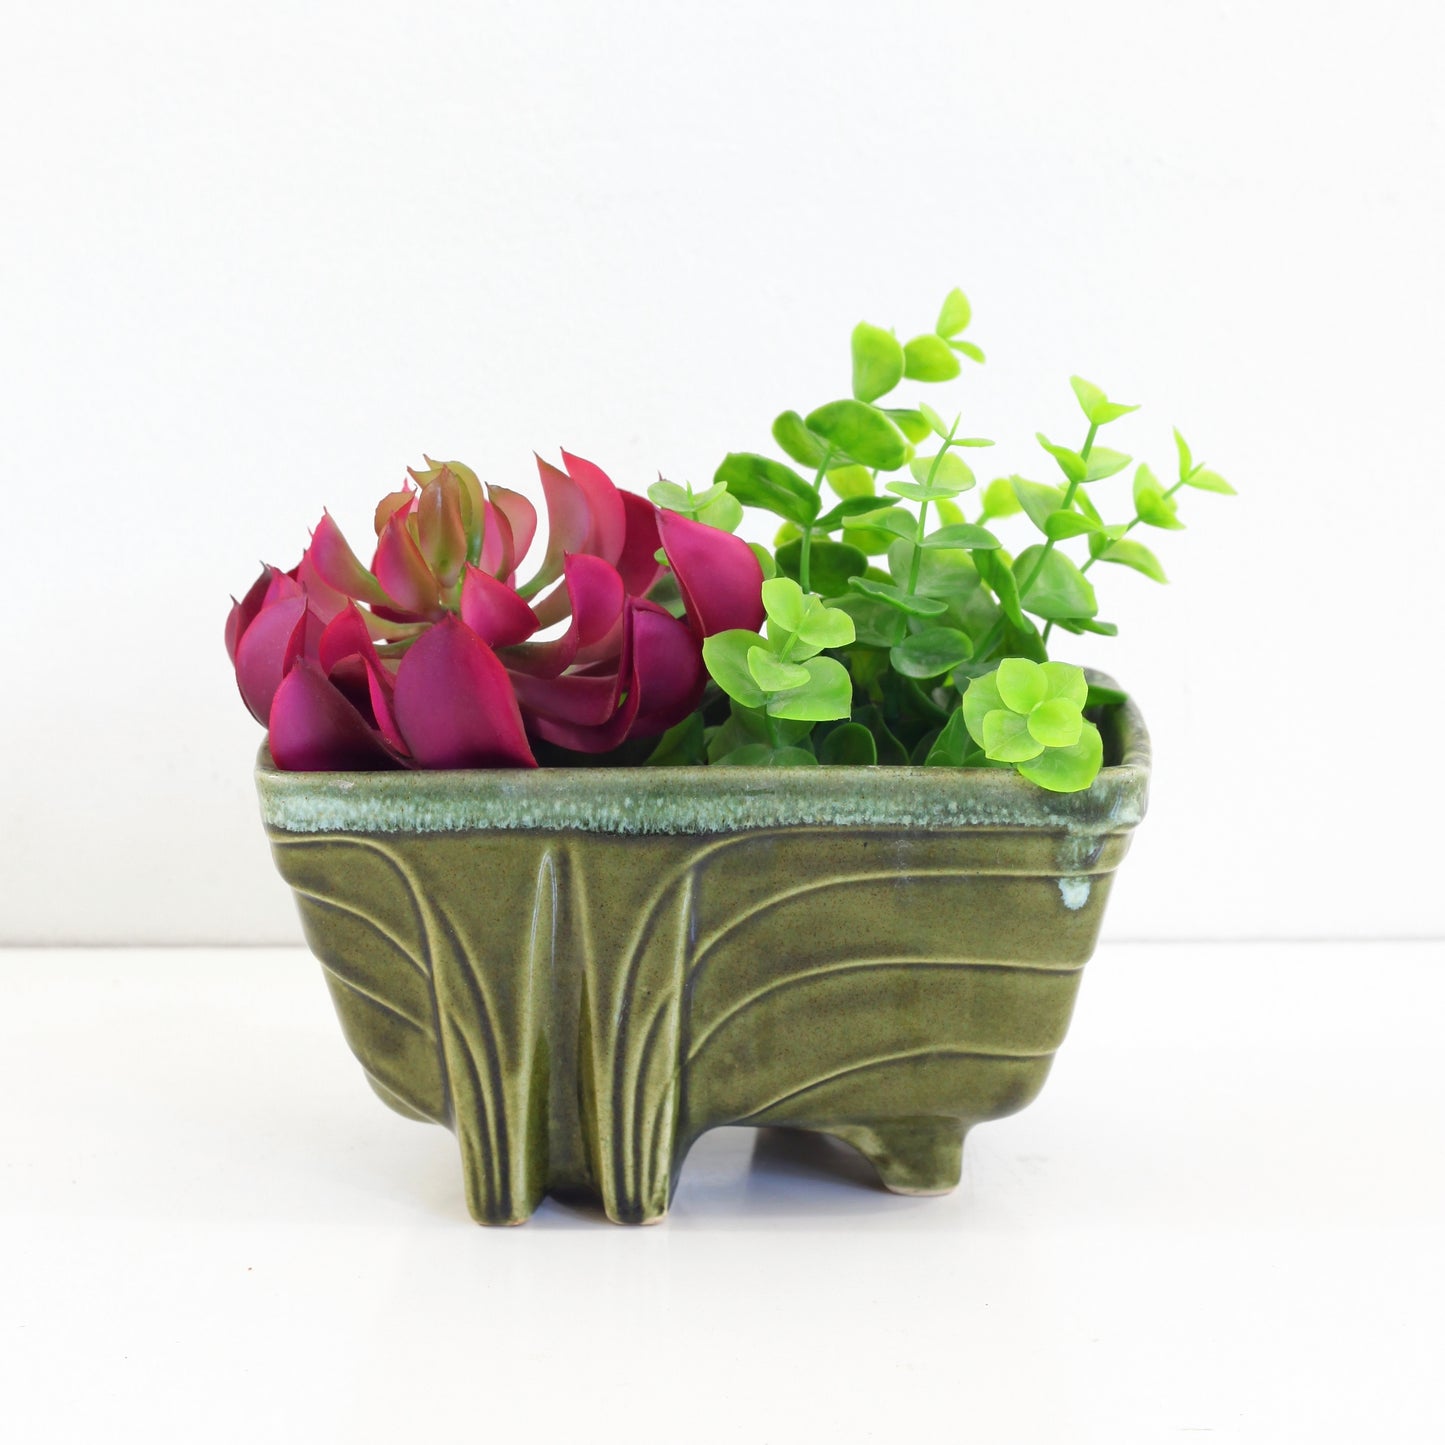 SOLD - Vintage Mossy Green Cookson Pottery Planter